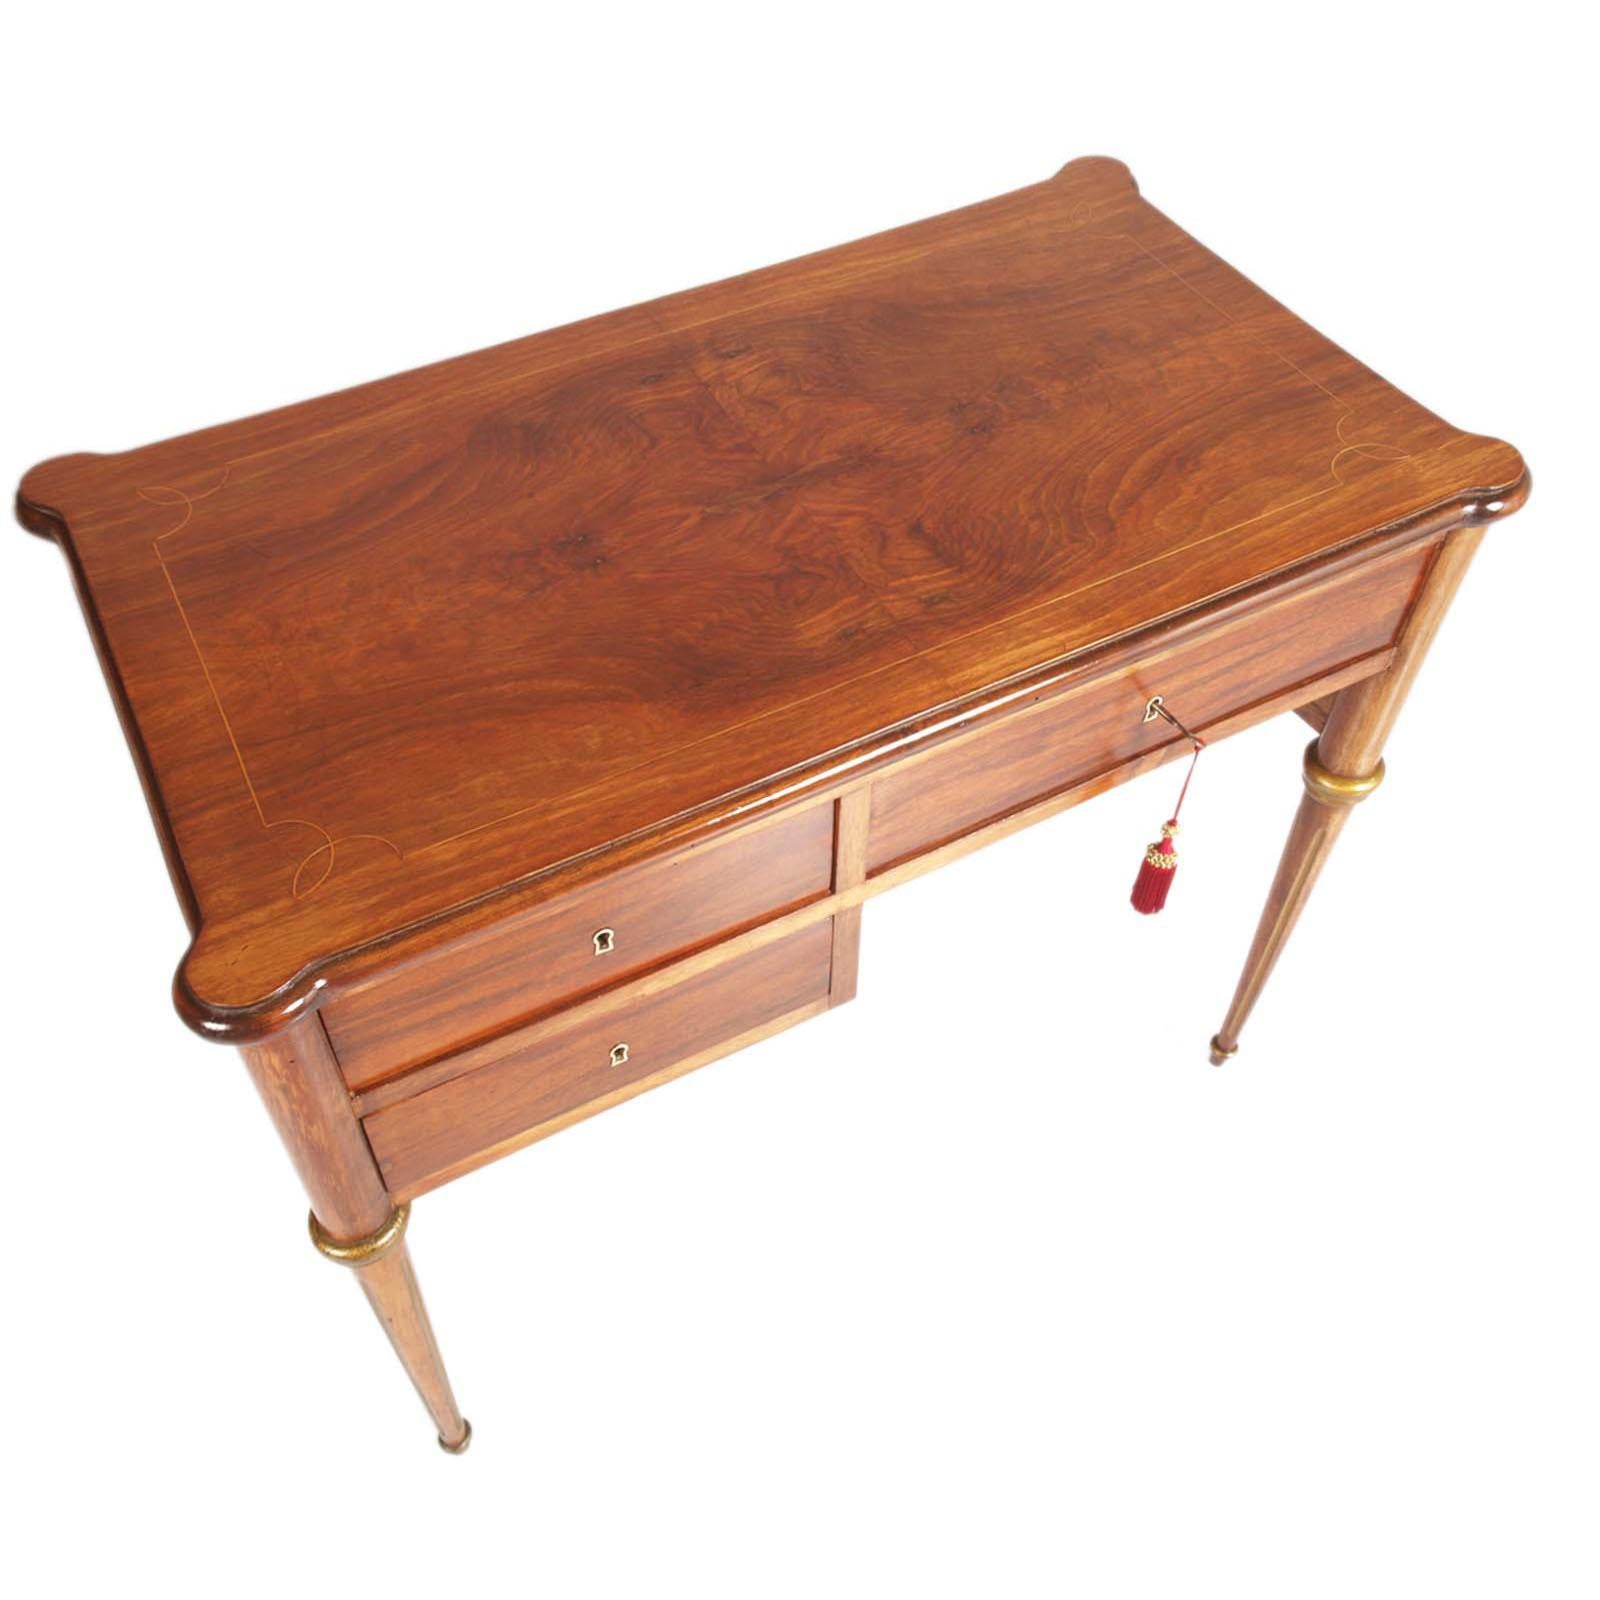 Italian elegant early 20th century Directoire writing desk in walnut massive and veneered with inlay on the top by Meroni & Fossati. Wax polished
Useful height under central drawer 60 cm.

To better understand the Directoire style of this